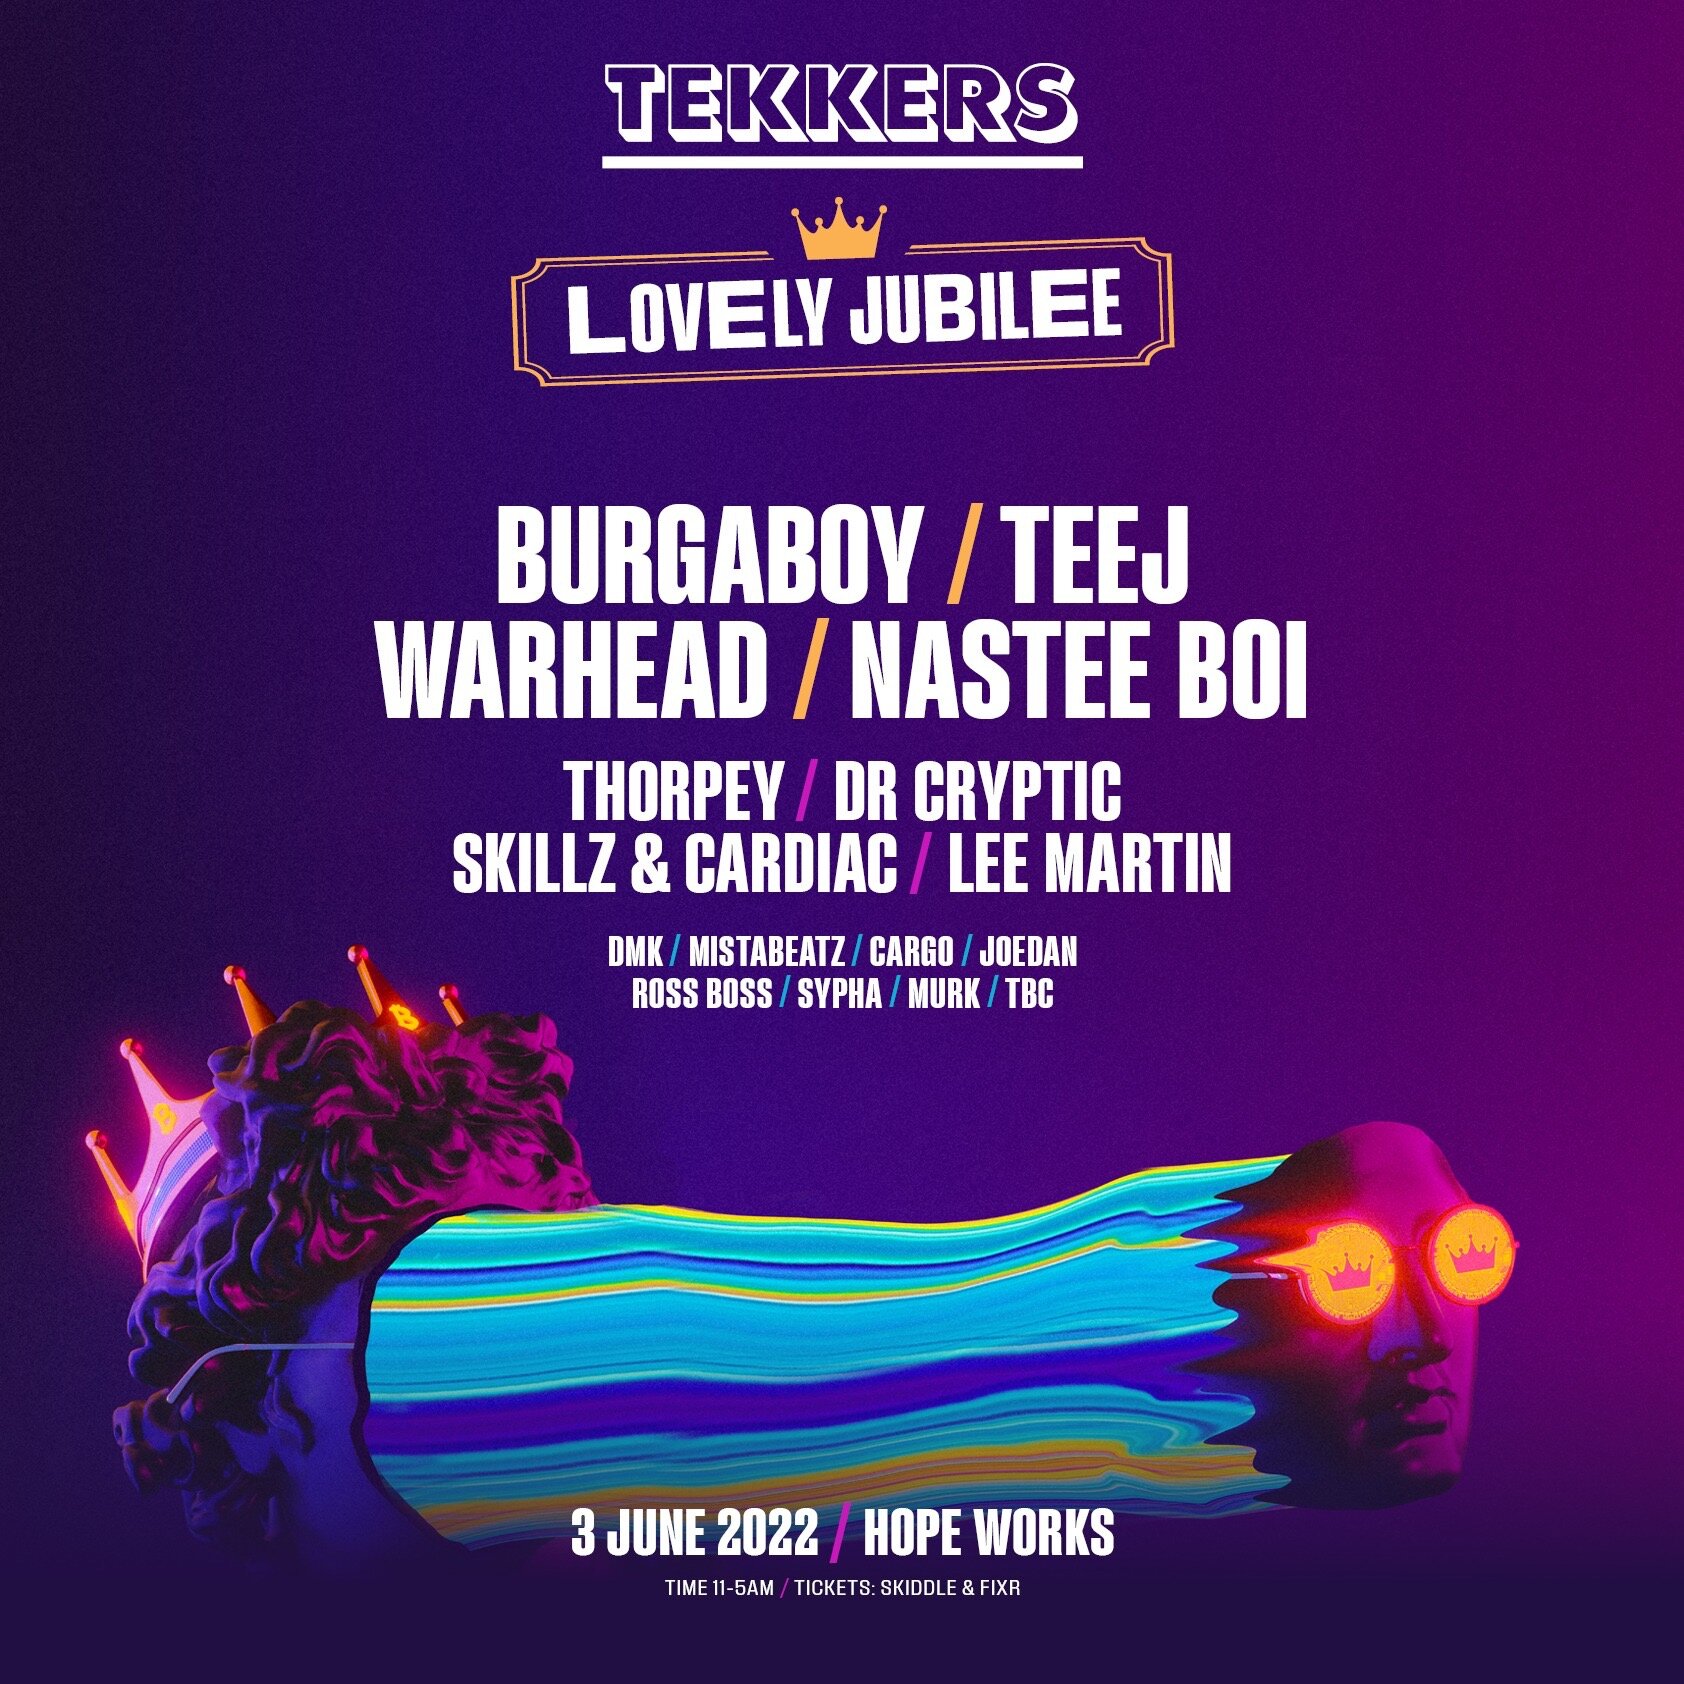 Tekkers 'Lovely Jubile' : Burgaboy, Teej, Warhead, Nasty Boi, Thorpe, Dr Cryptic and many more